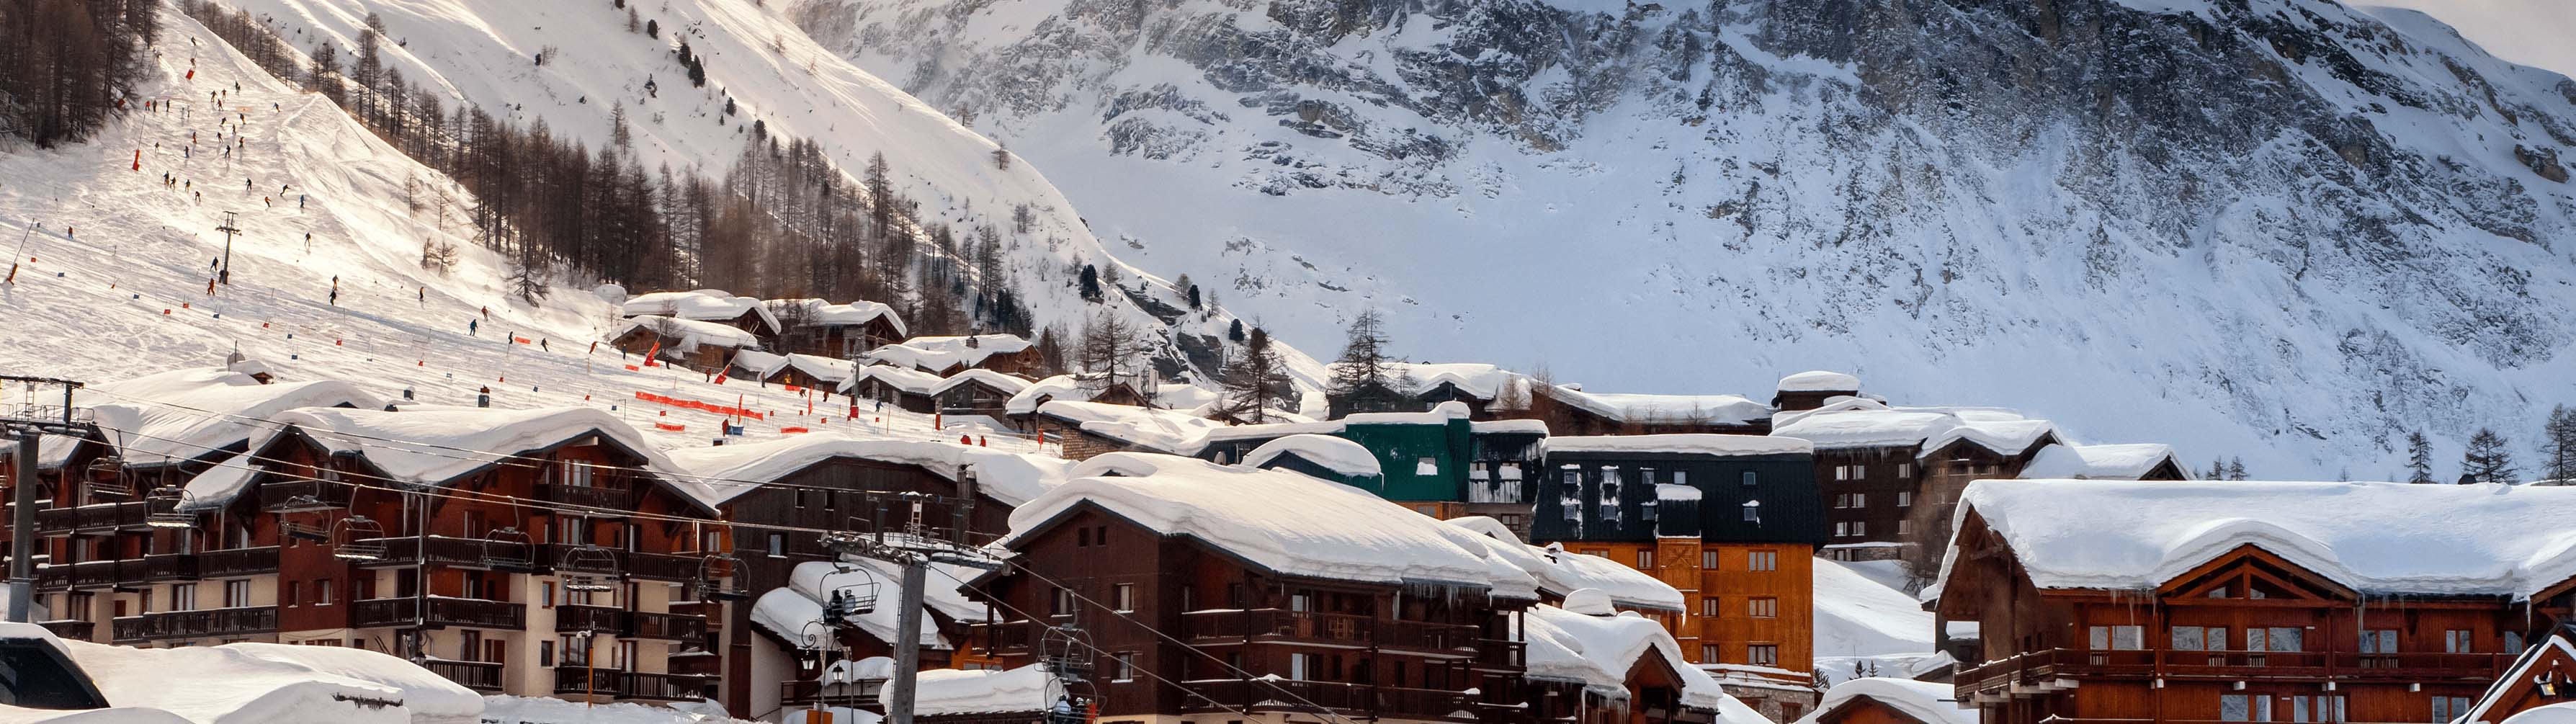 The chalets and cabins of Val d'Isere lie before pristine, snow-covered slopes.